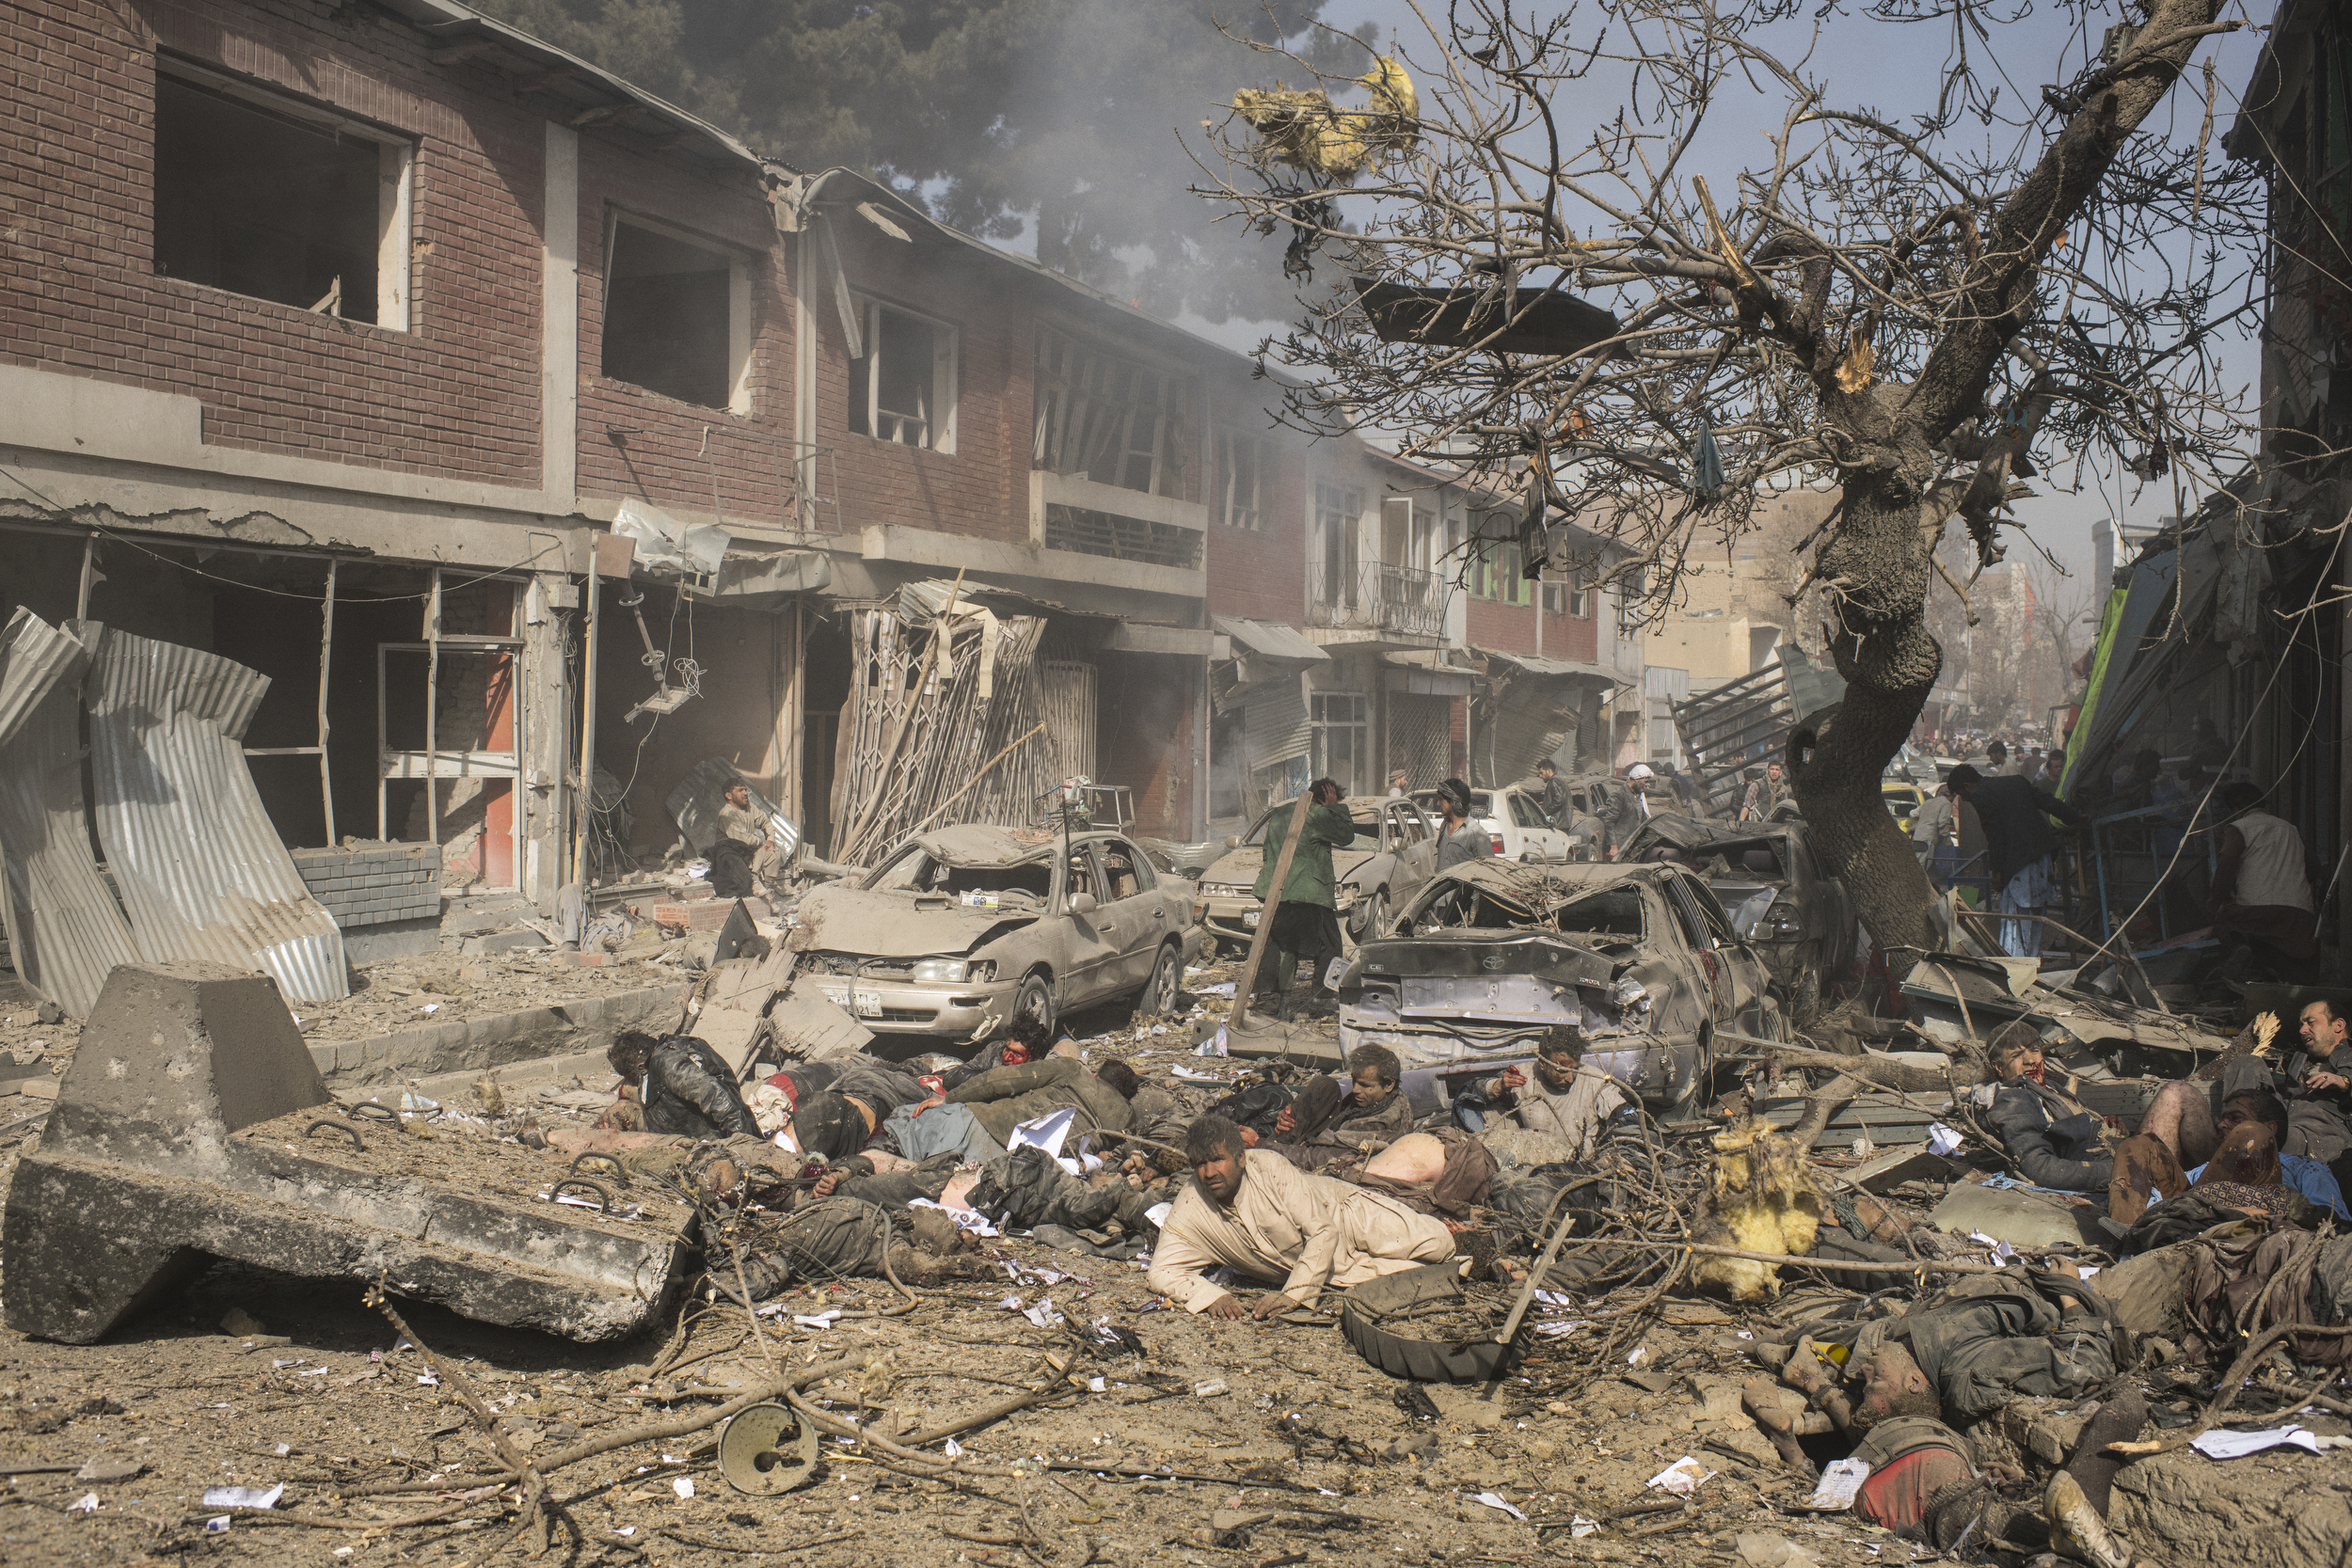  Victims lie dead and severely wounded at the site of a bomb that had been disguised inside an ambulance and detonated in an area of small businesses and a hospital in central Kabul. 103 were killed and more than 150 wounded by the bomb for which the Taliban claimed responsibility. Kabul, January, 2018. 